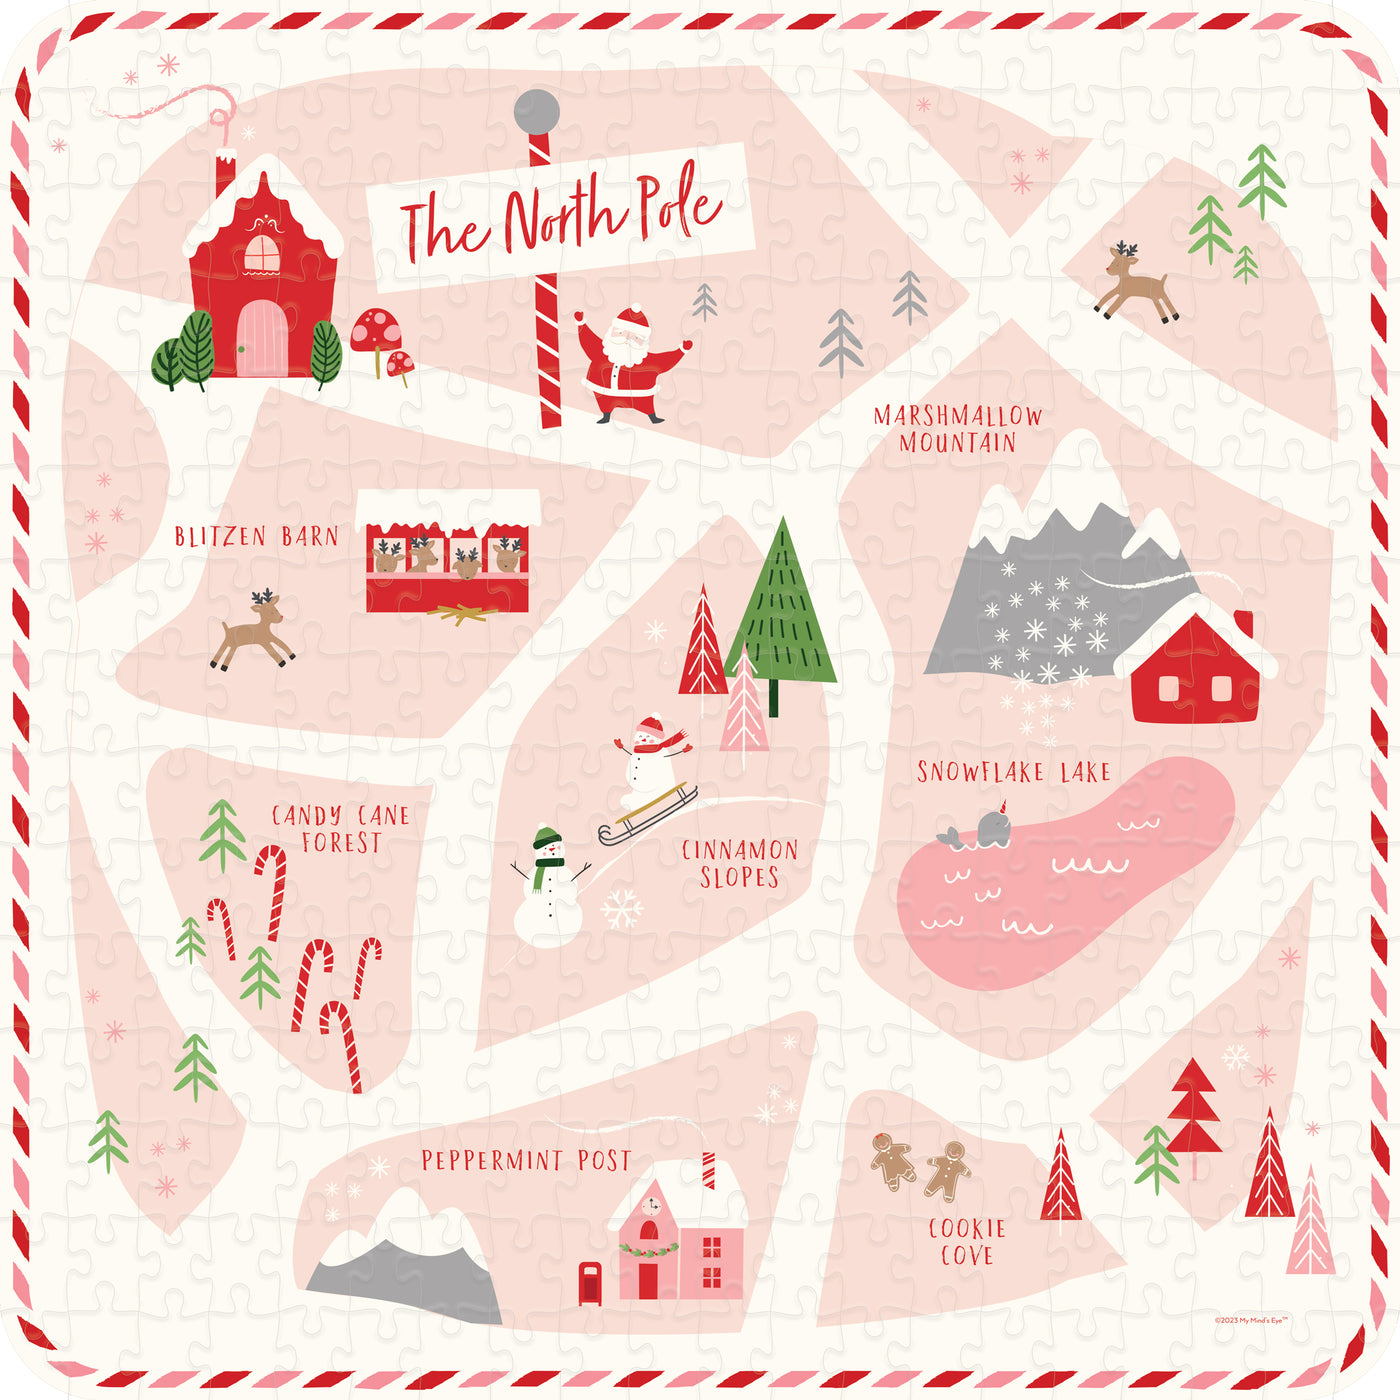 BEC1022 - Believe North Pole Map Puzzle